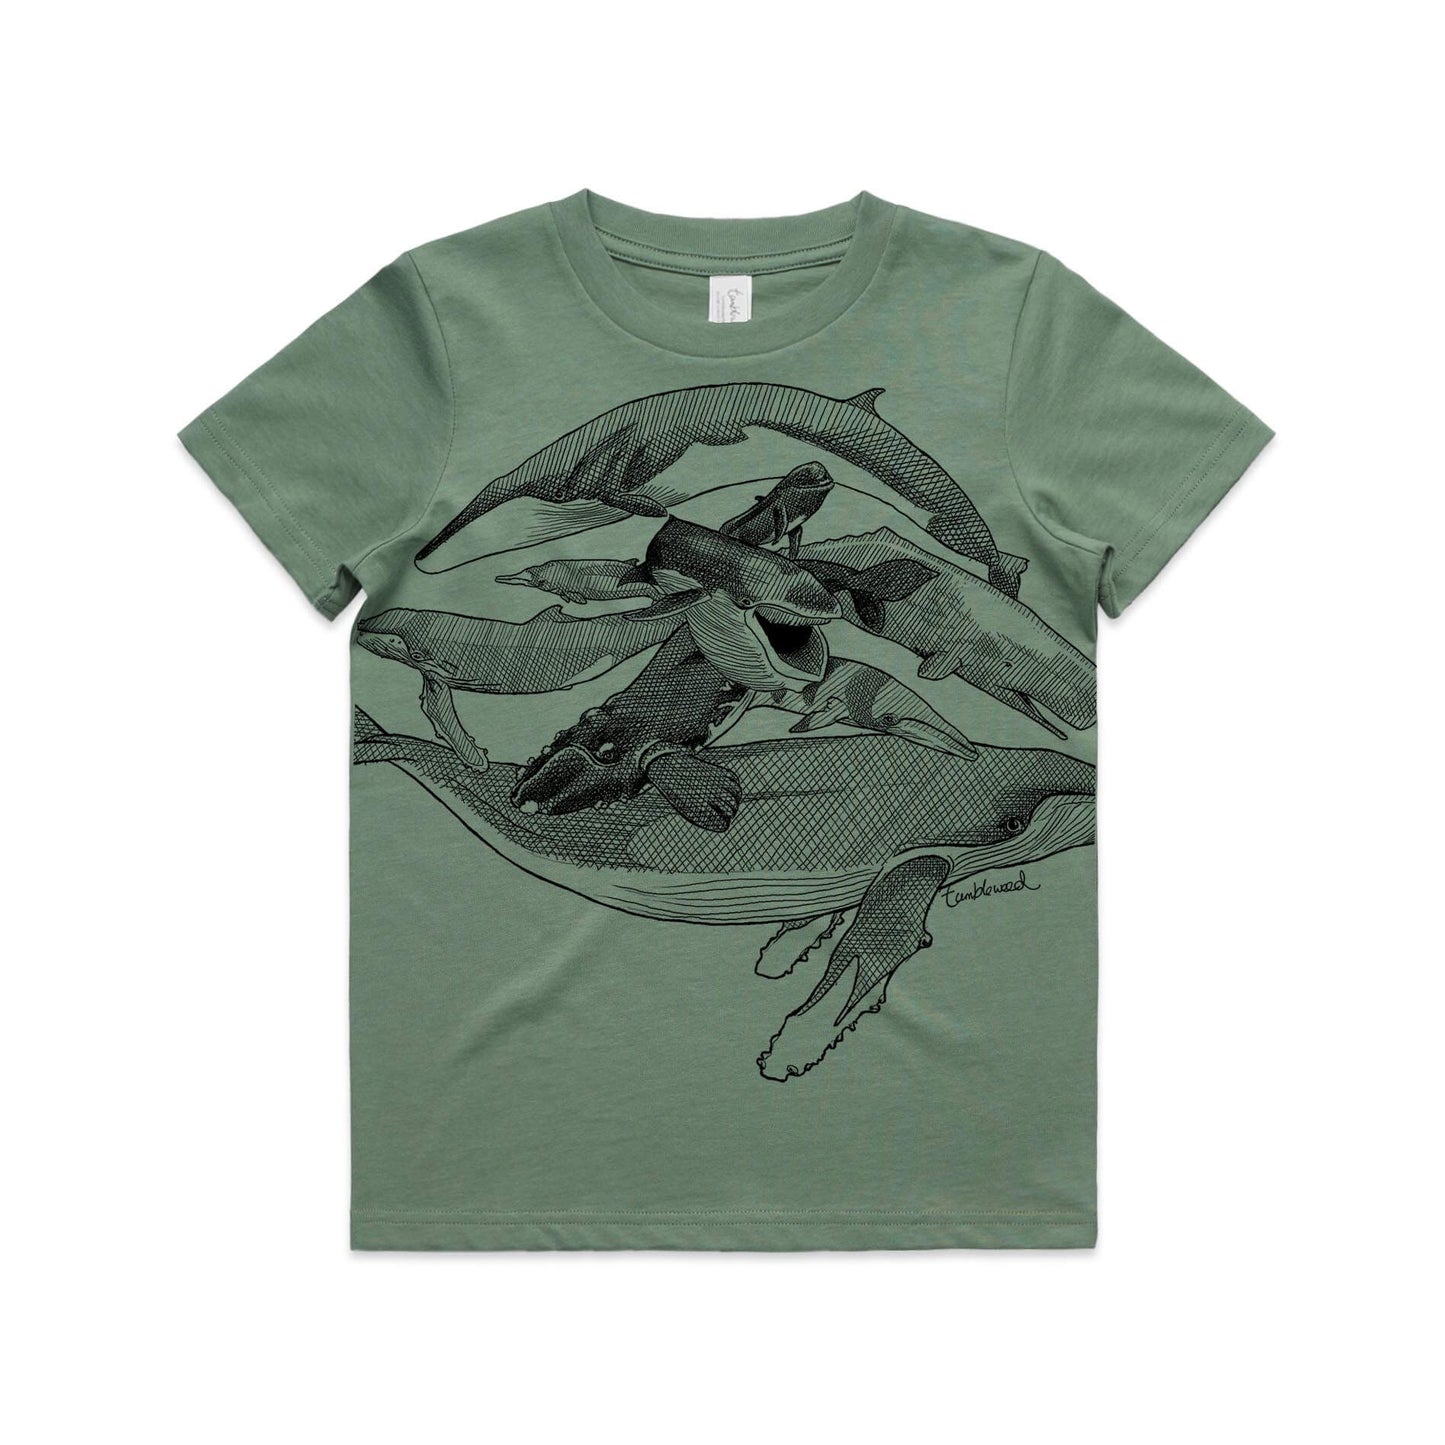 Sage, cotton kids' t-shirt with screen printed Kids whales design.